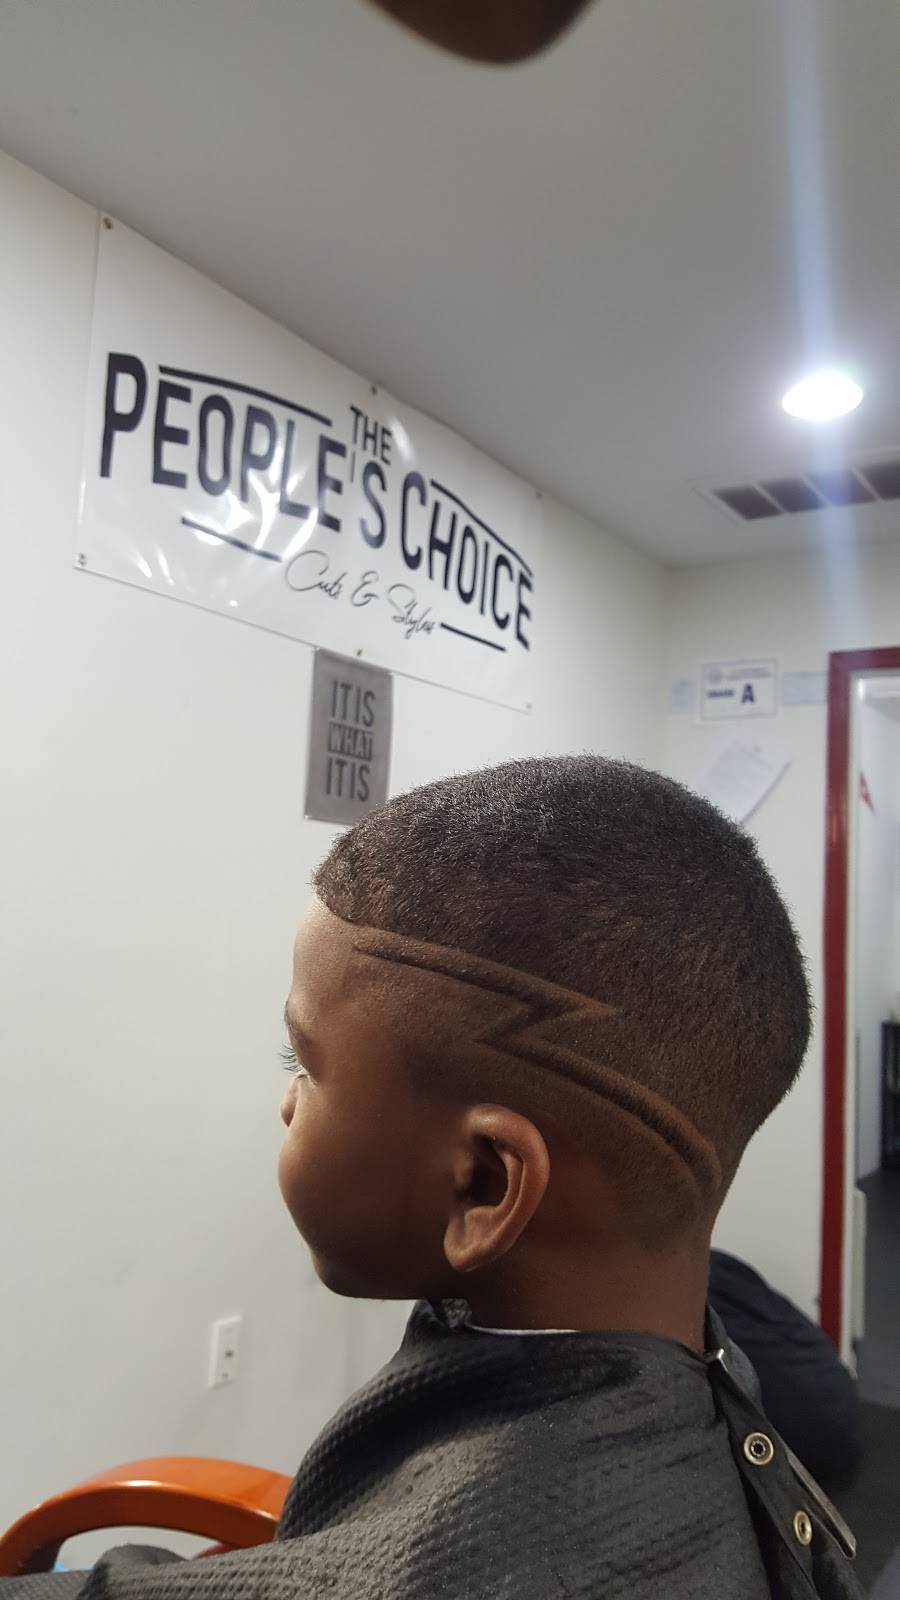 The Peoples Choice Cuts and Styles | 1601 E Geer St suite a, Durham, NC 27704, USA | Phone: (919) 259-4721